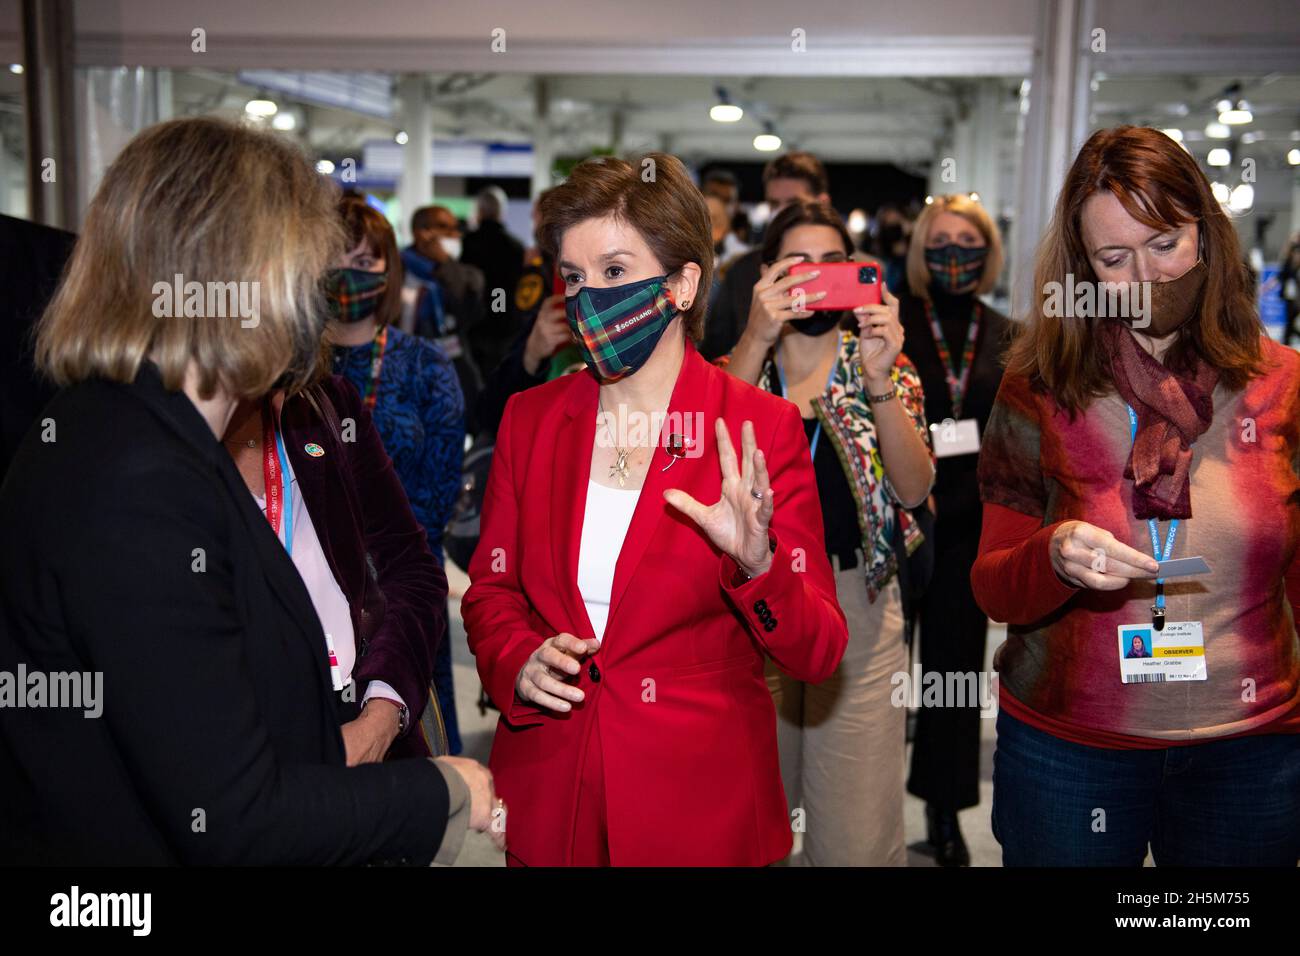 Glasgow, Scotland, UK. 10th Nov, 2021. PICTURED: Nicola Sturgeon MSP - First Minister of Scotland, spotted in the foyer at COP26 Climate Change Conference. Credit: Colin Fisher/Alamy Live News Stock Photo